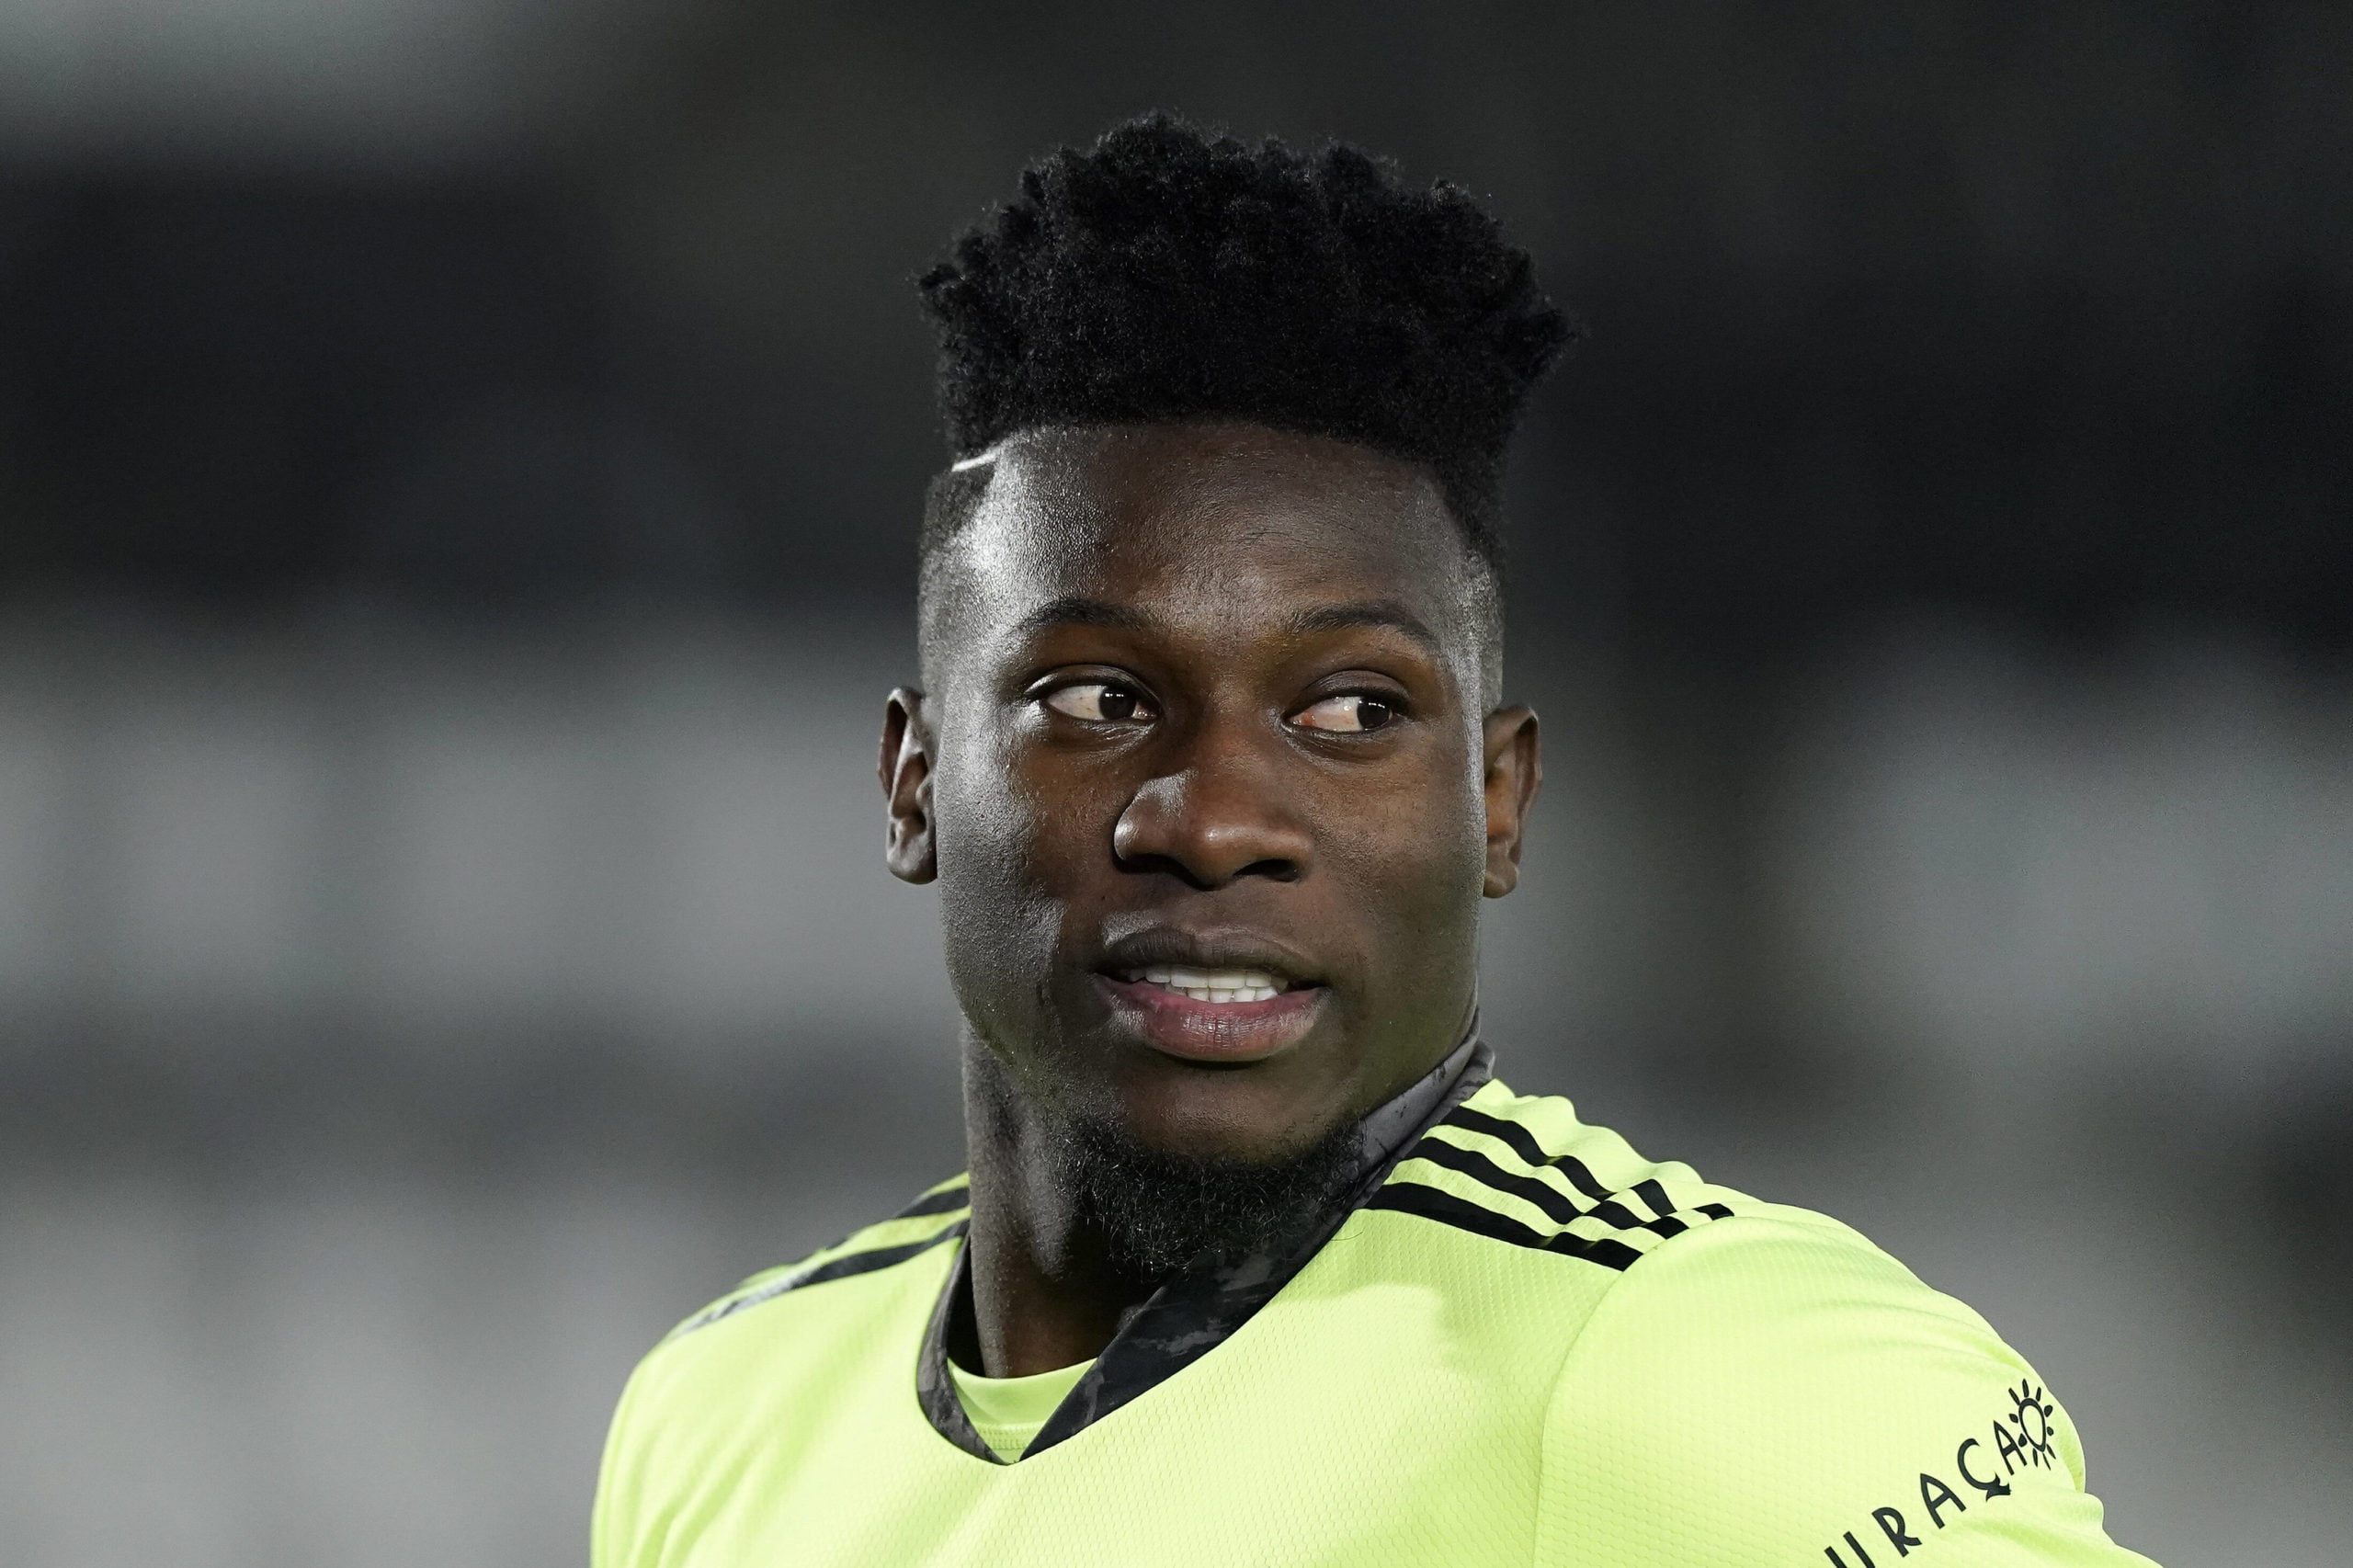 Barcelona eyeing a move for Onana who is seen in the picture